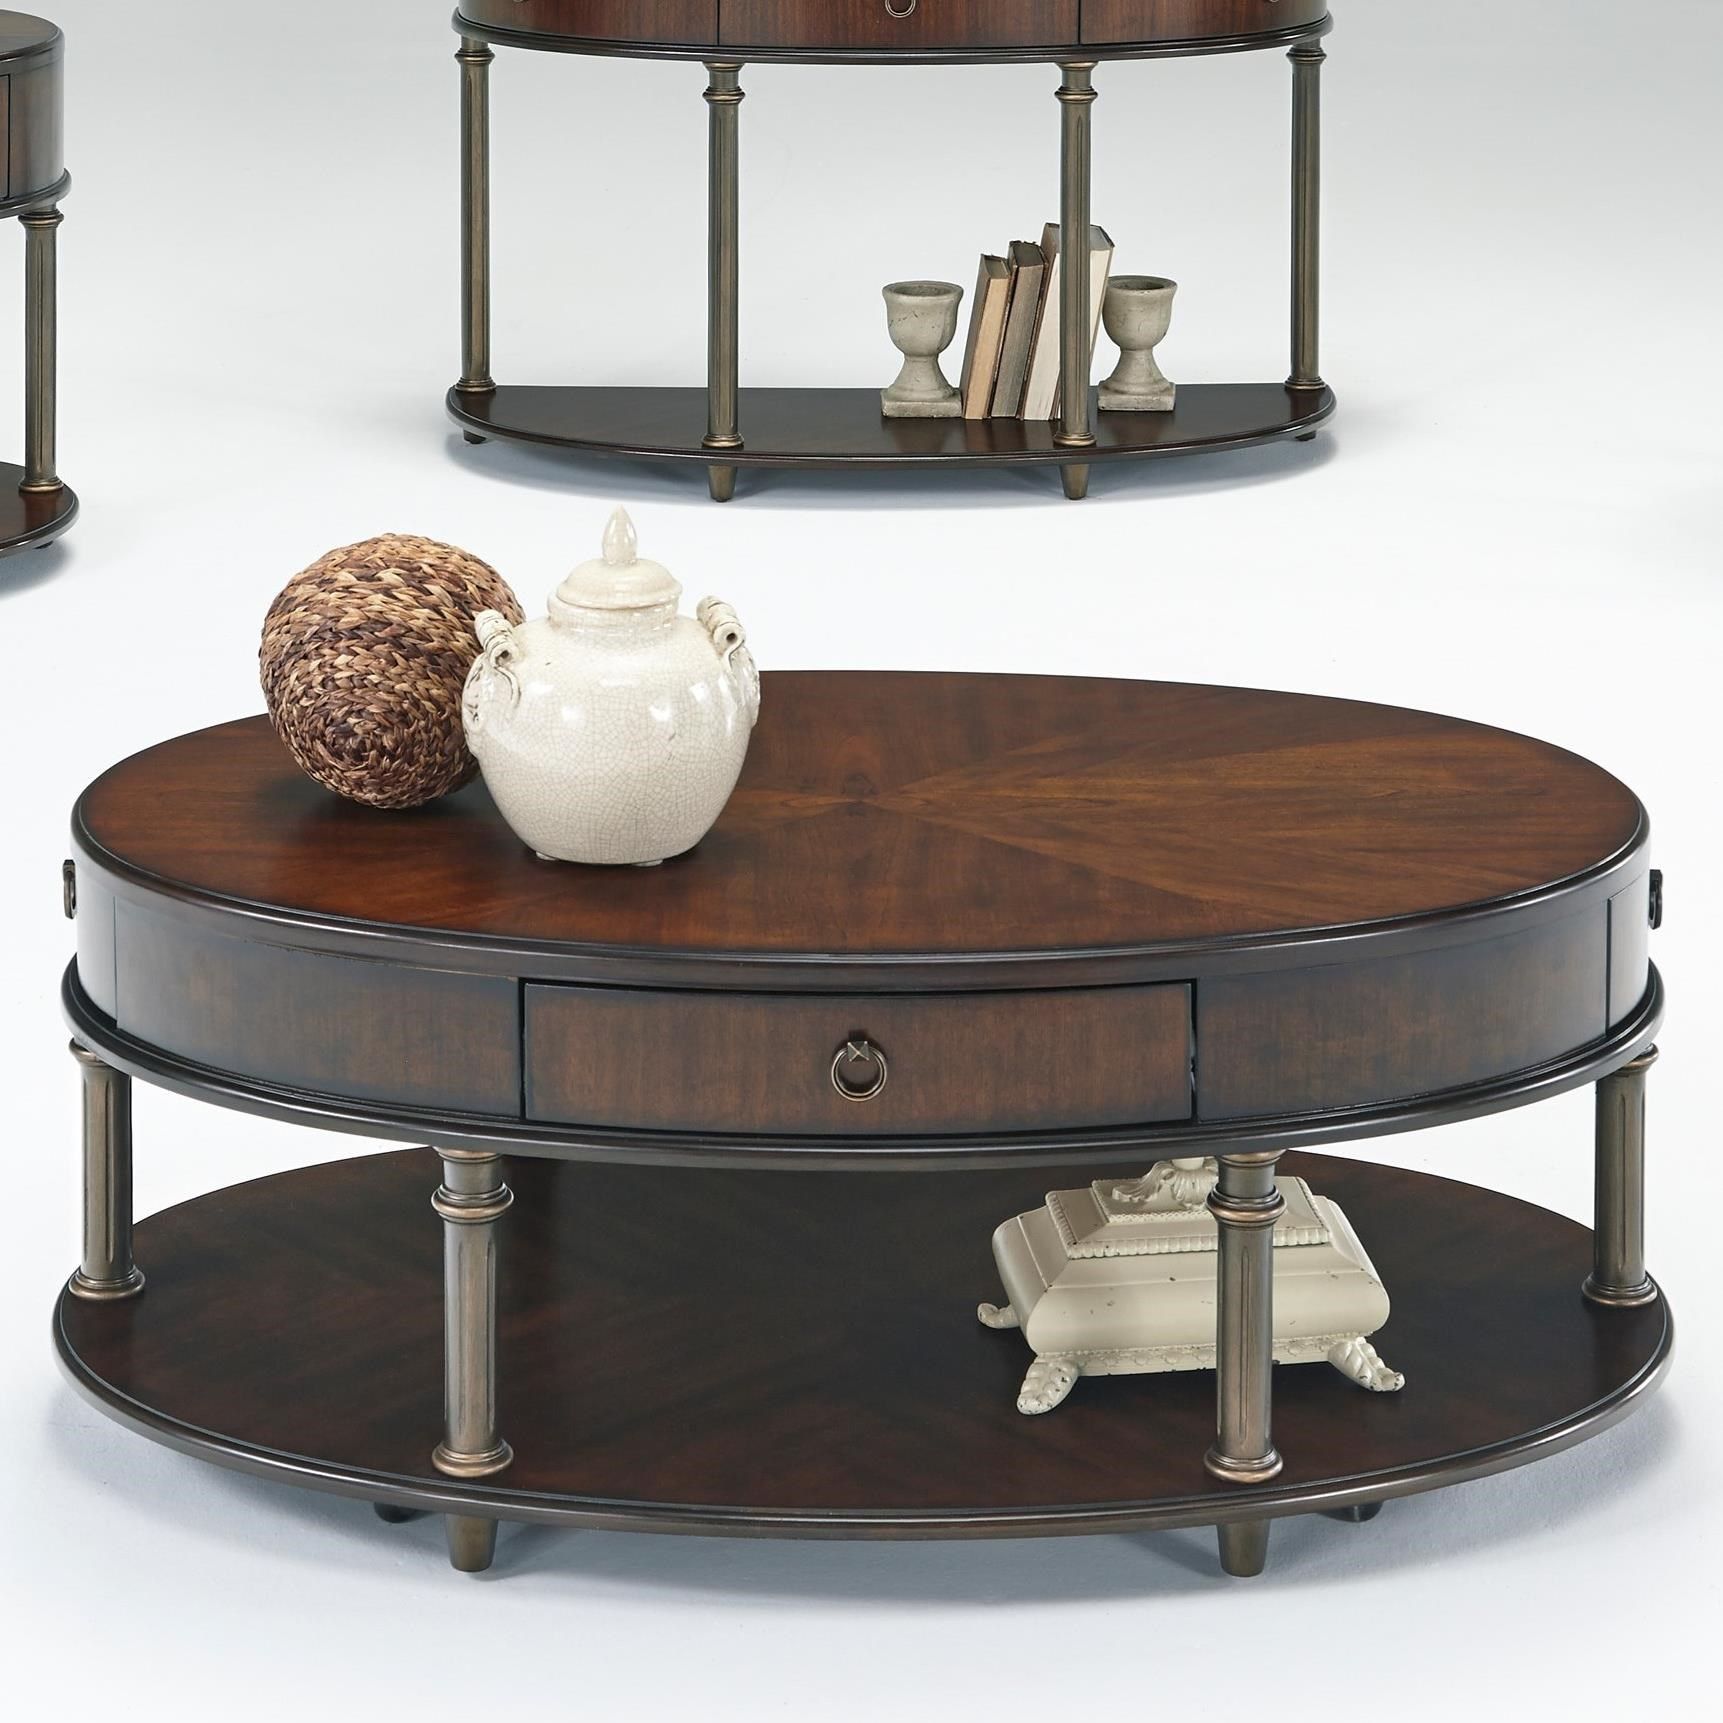 Progressive Furniture Regent Court Castered Oval Cocktail Table | Lindy With Progressive Furniture Cocktail Tables (Gallery 9 of 20)